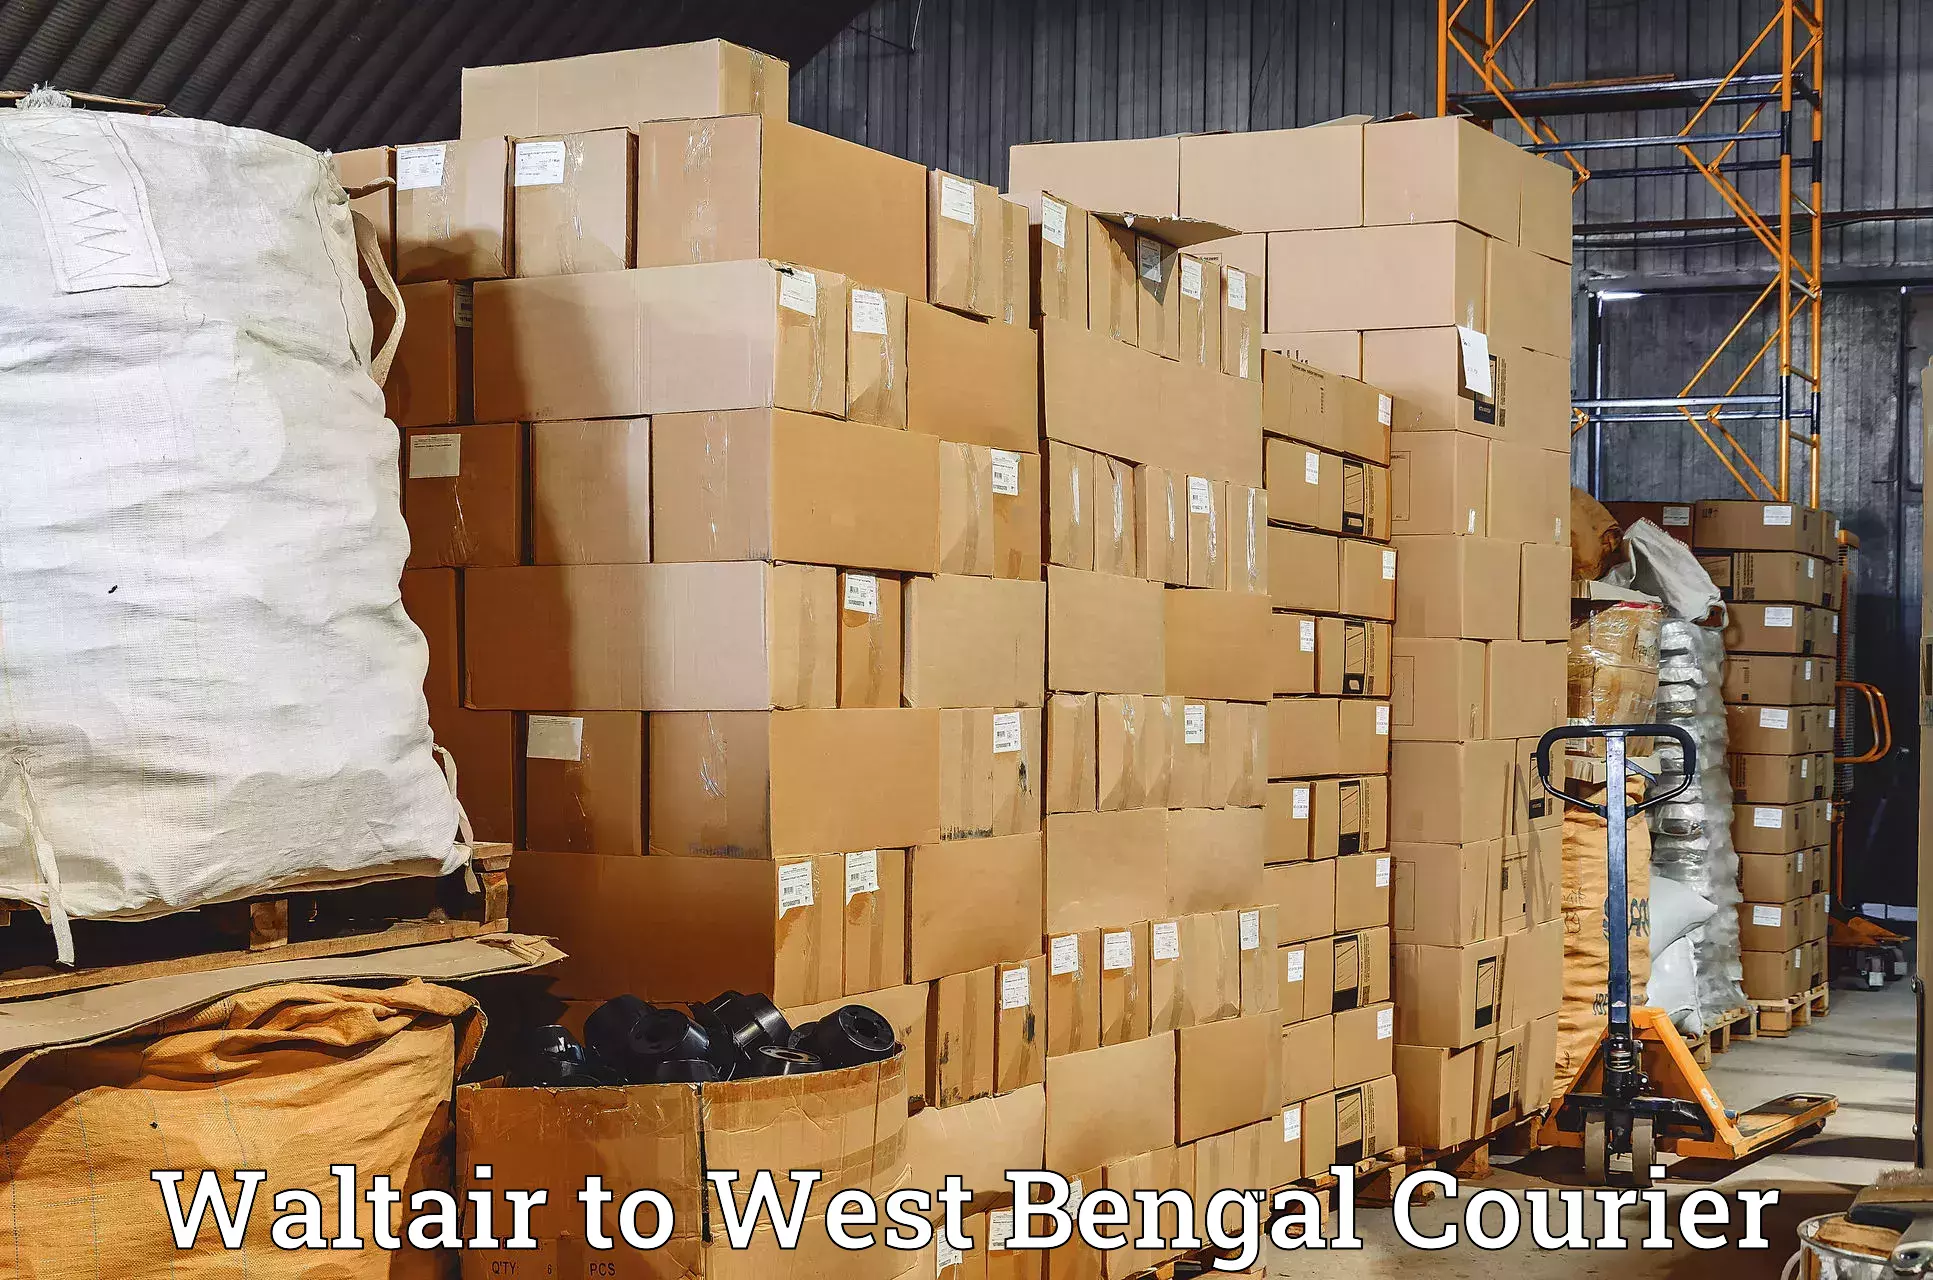 Global shipping networks in Waltair to West Bengal